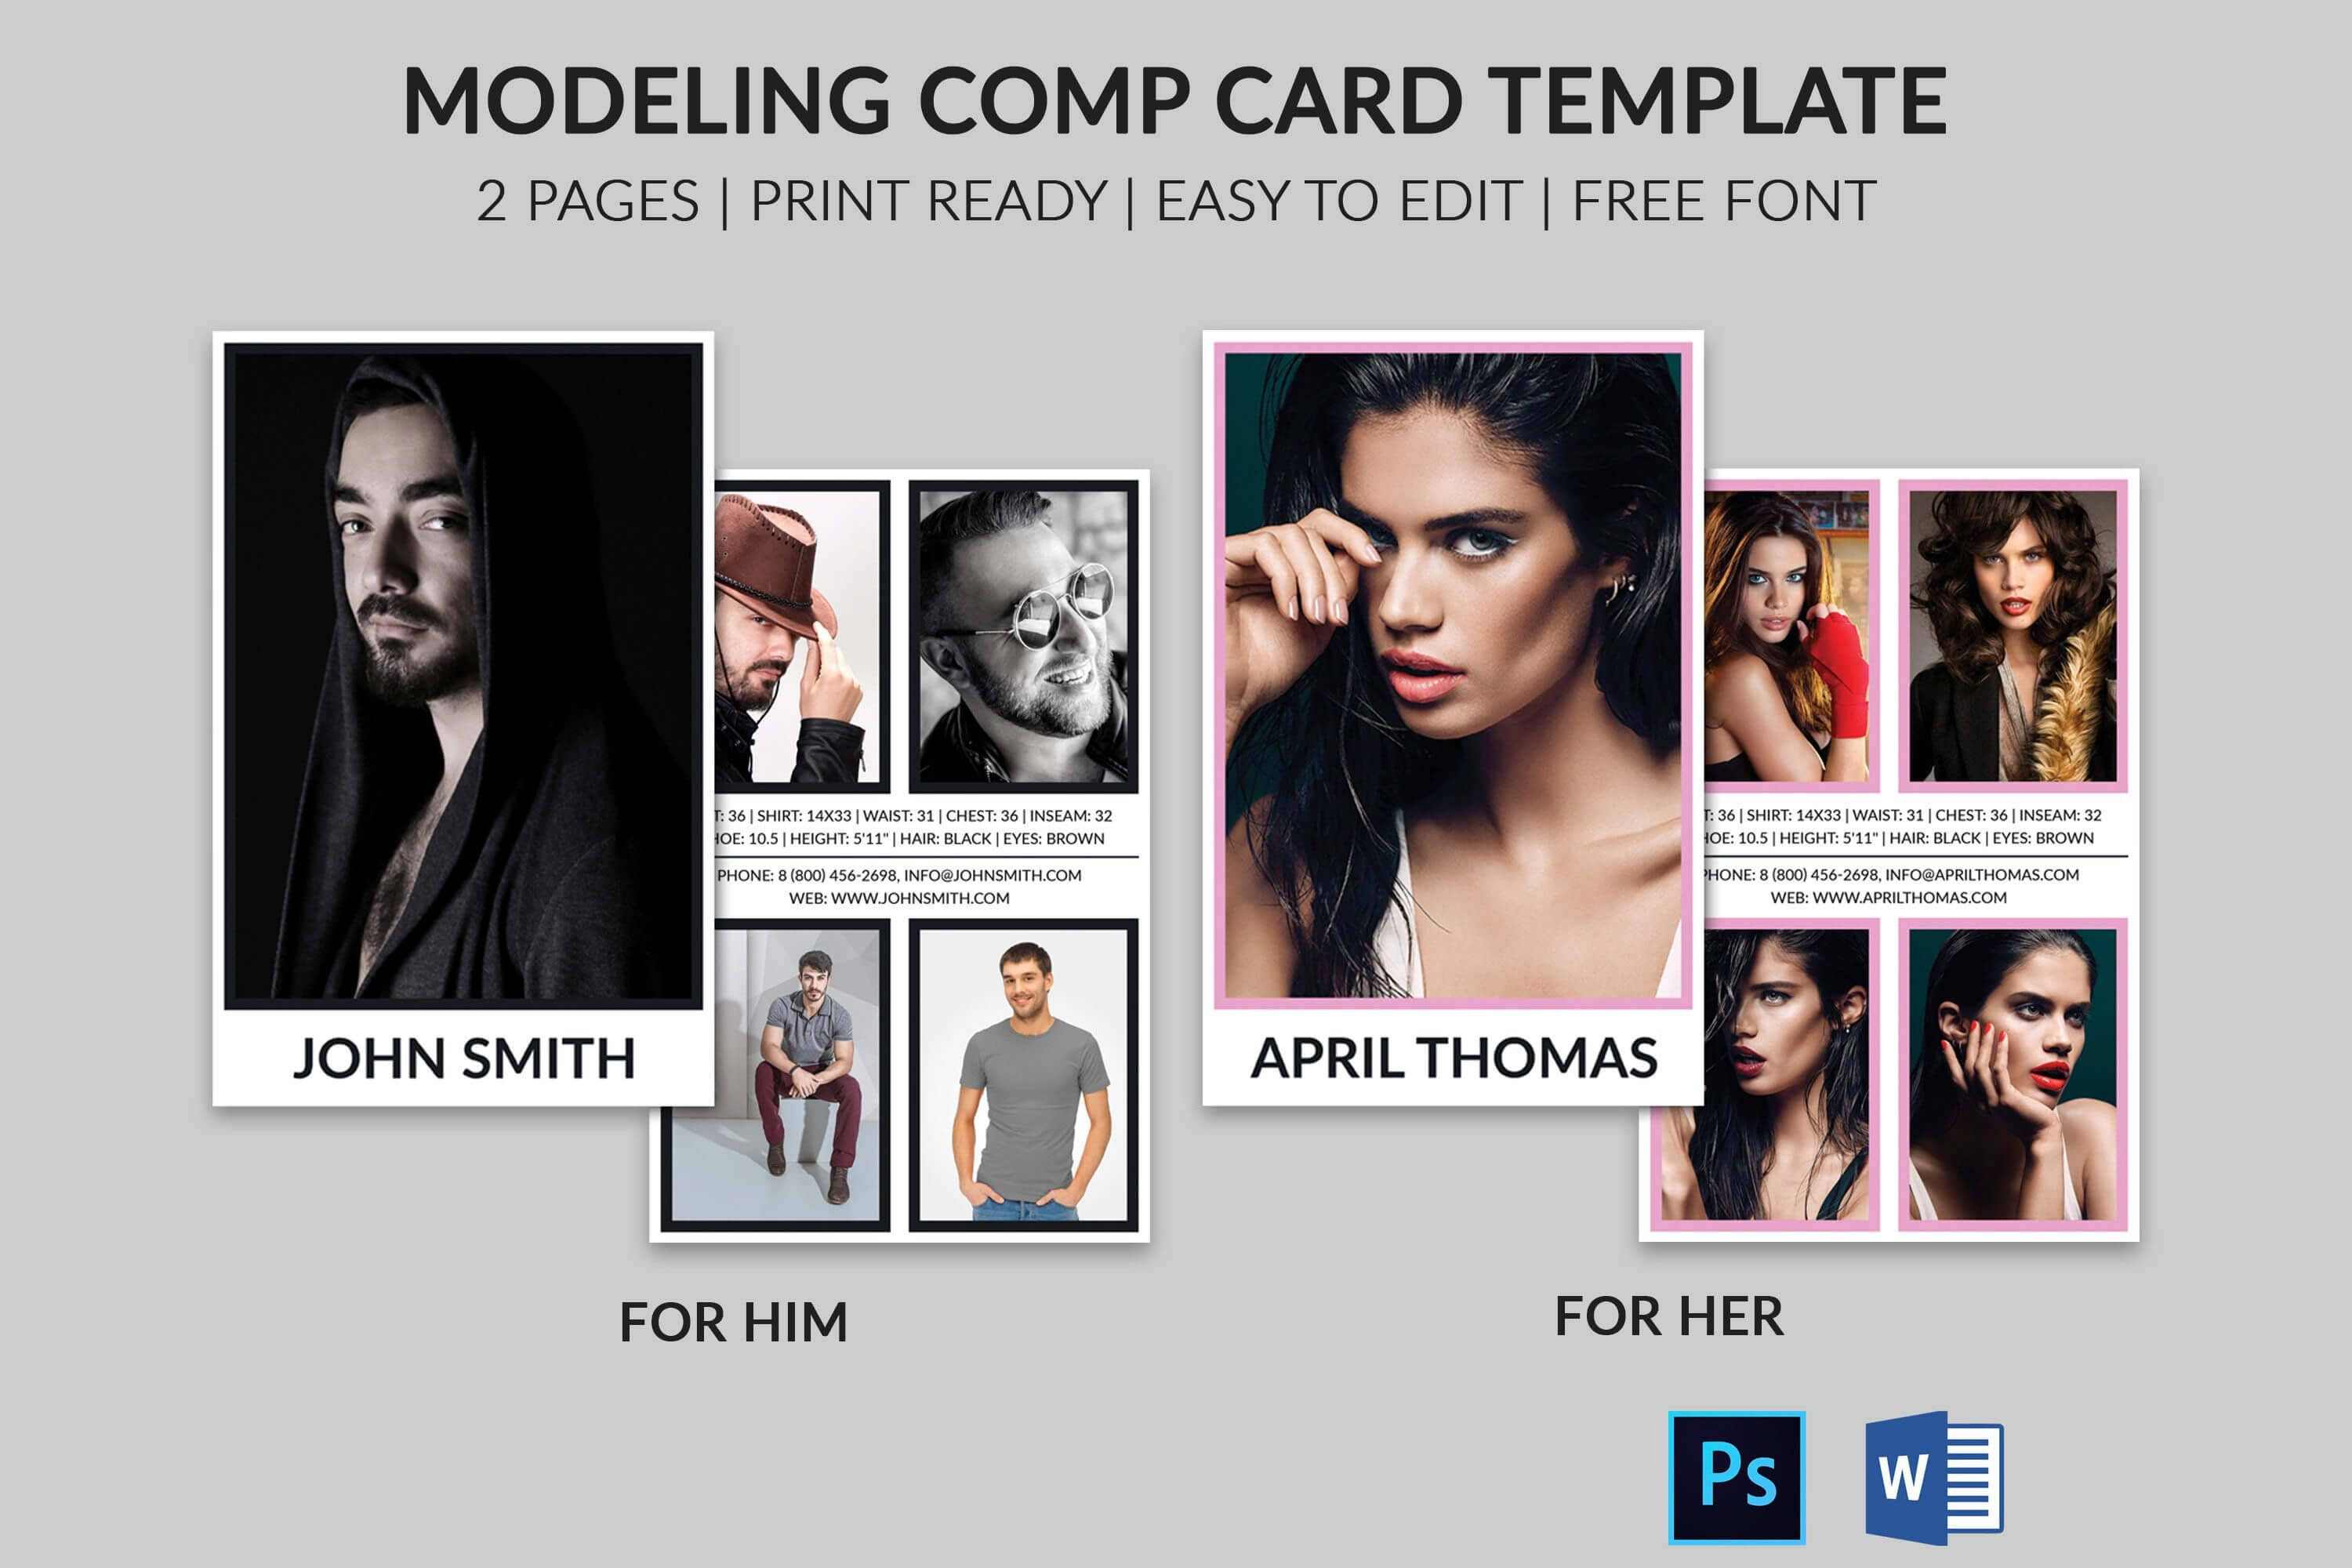 Modeling Comp Card | Model Agency Zed Card | Photoshop & Ms Pertaining To Free Zed Card Template